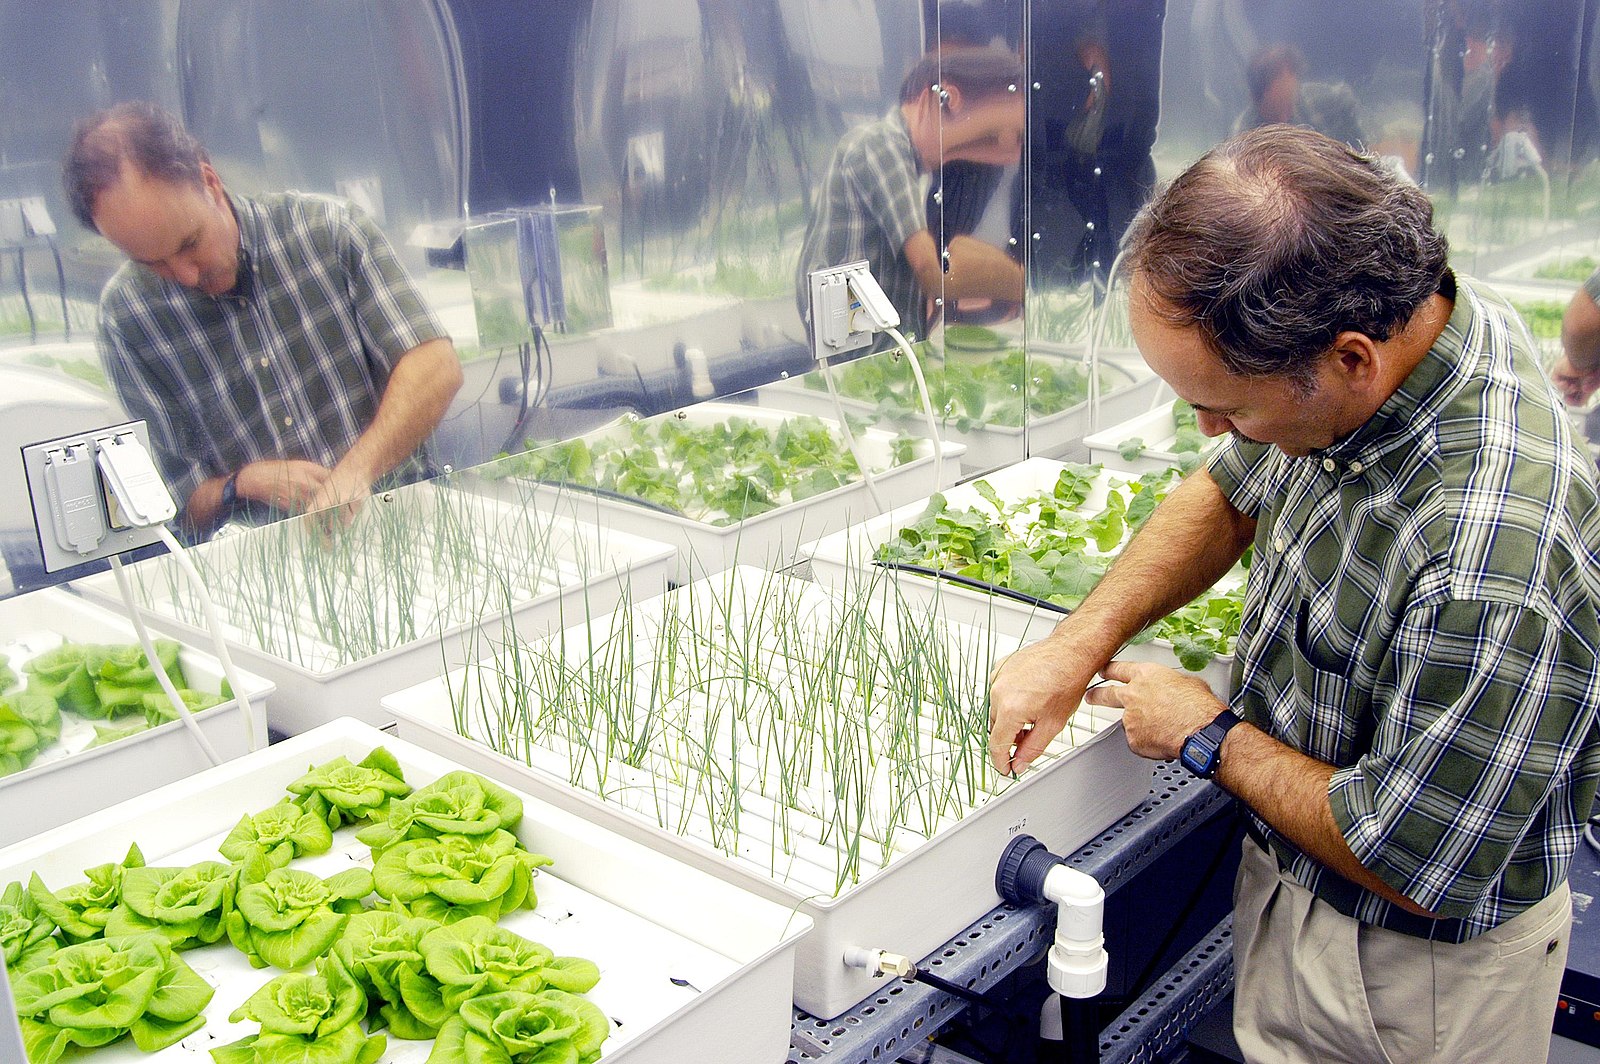 This photo shows a NASA researcher examining a hydroponic array, including several types of plants. The onions grow in a tray with long, thin openings from which emerge their grass-like leaves. Next to the onions are lettuces in a try appearing to have holes from which their larger leaves can emerge.